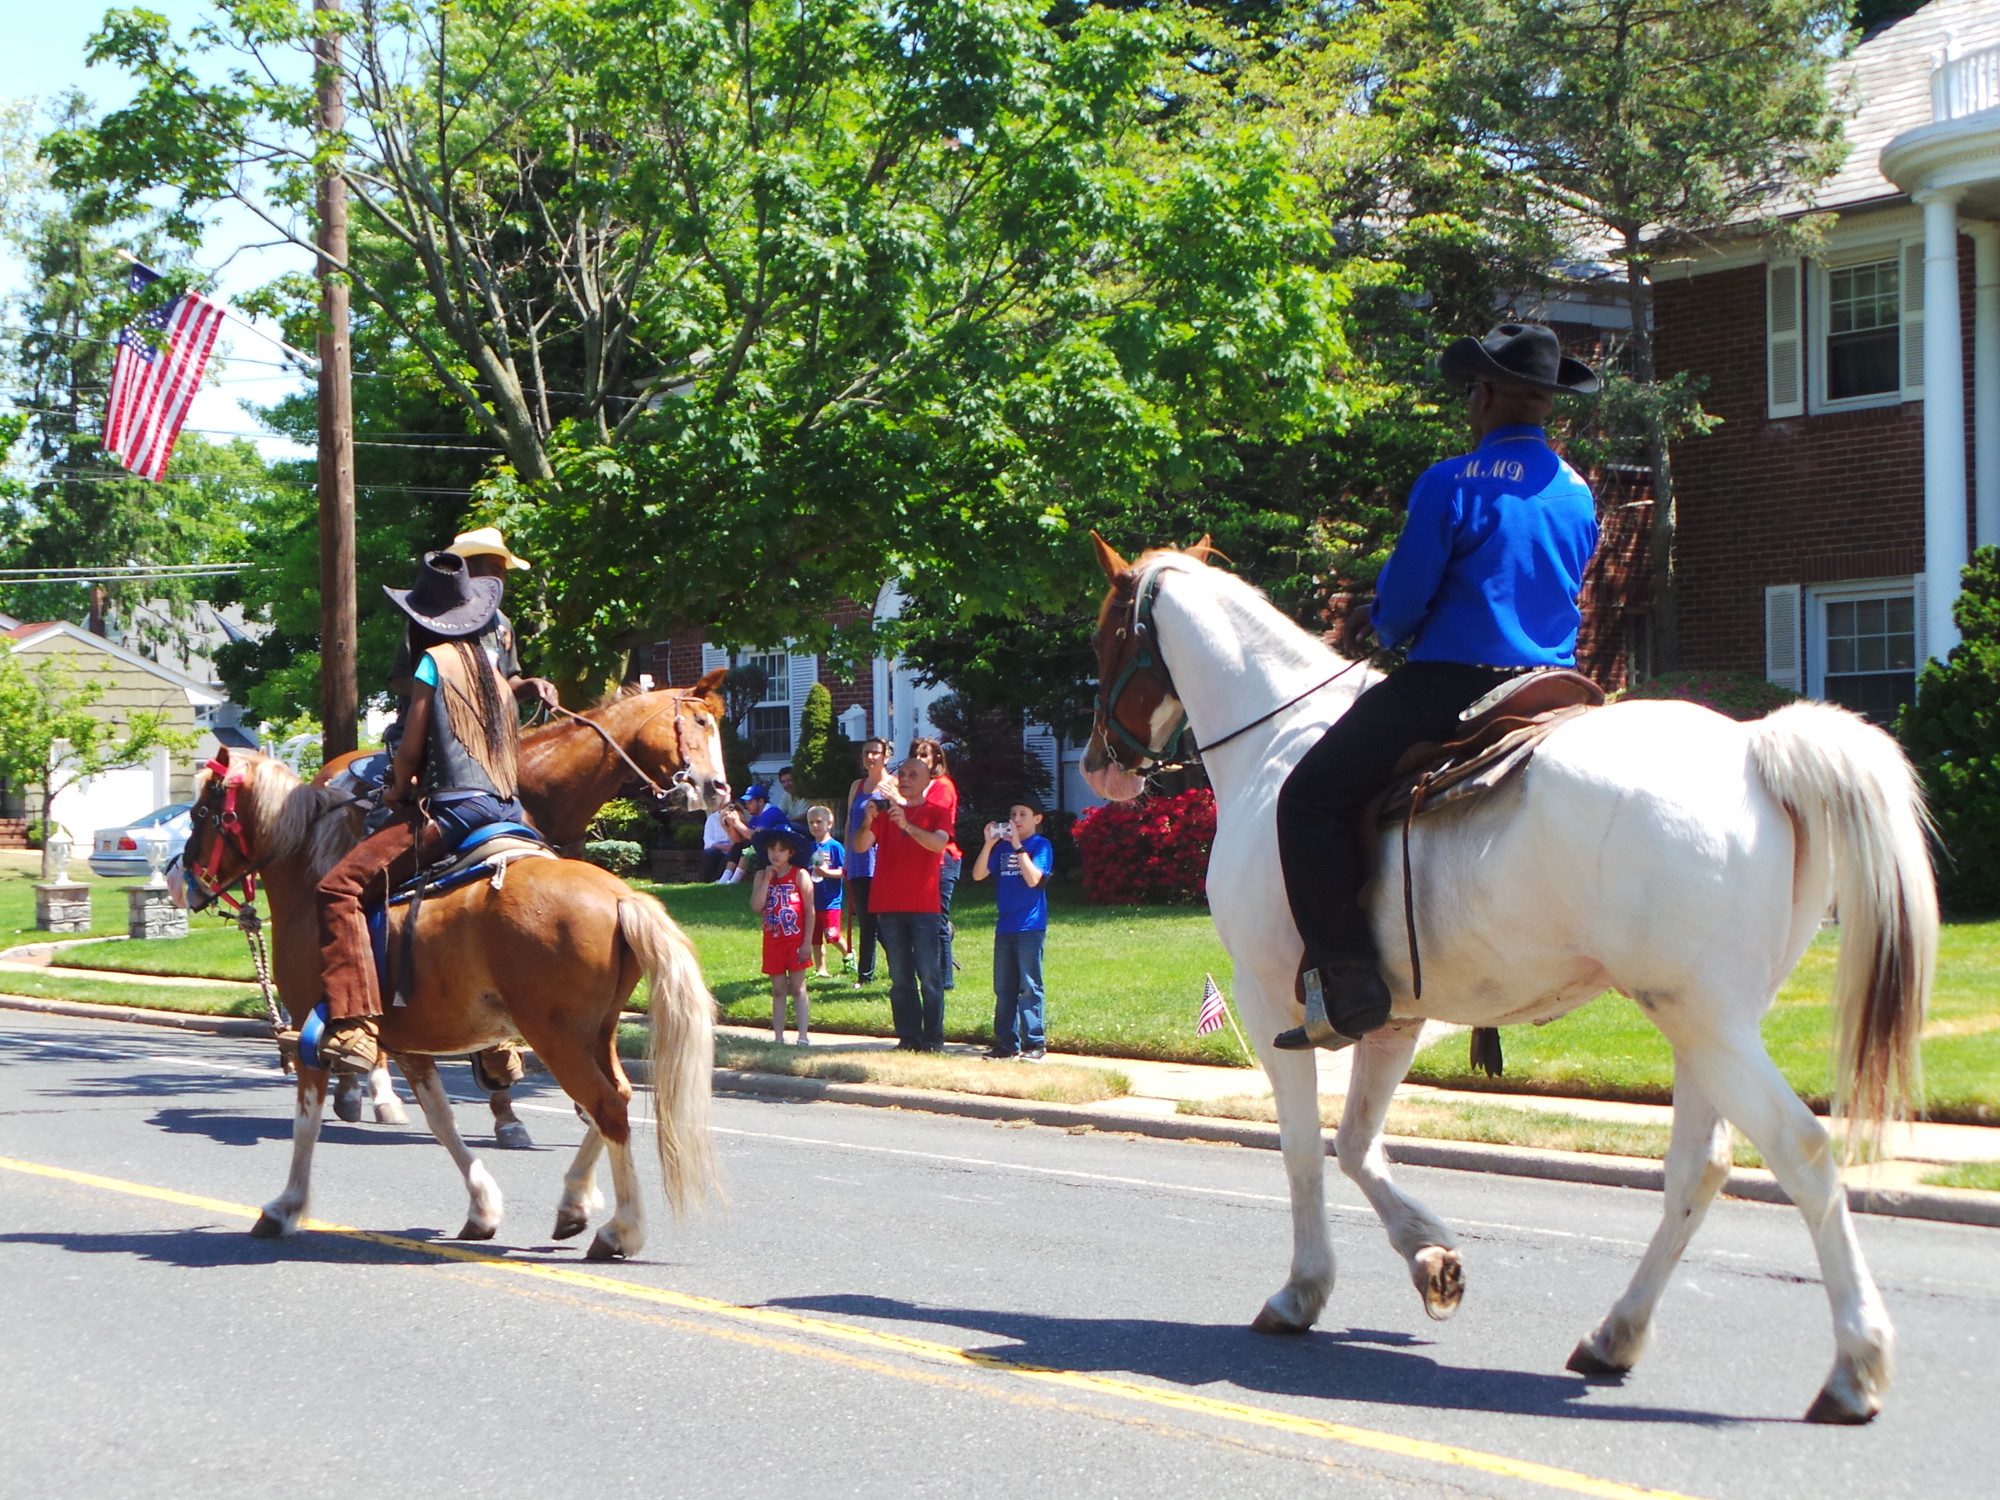 A group of six riders from the Federation of Black Cowboys participated in the parade.